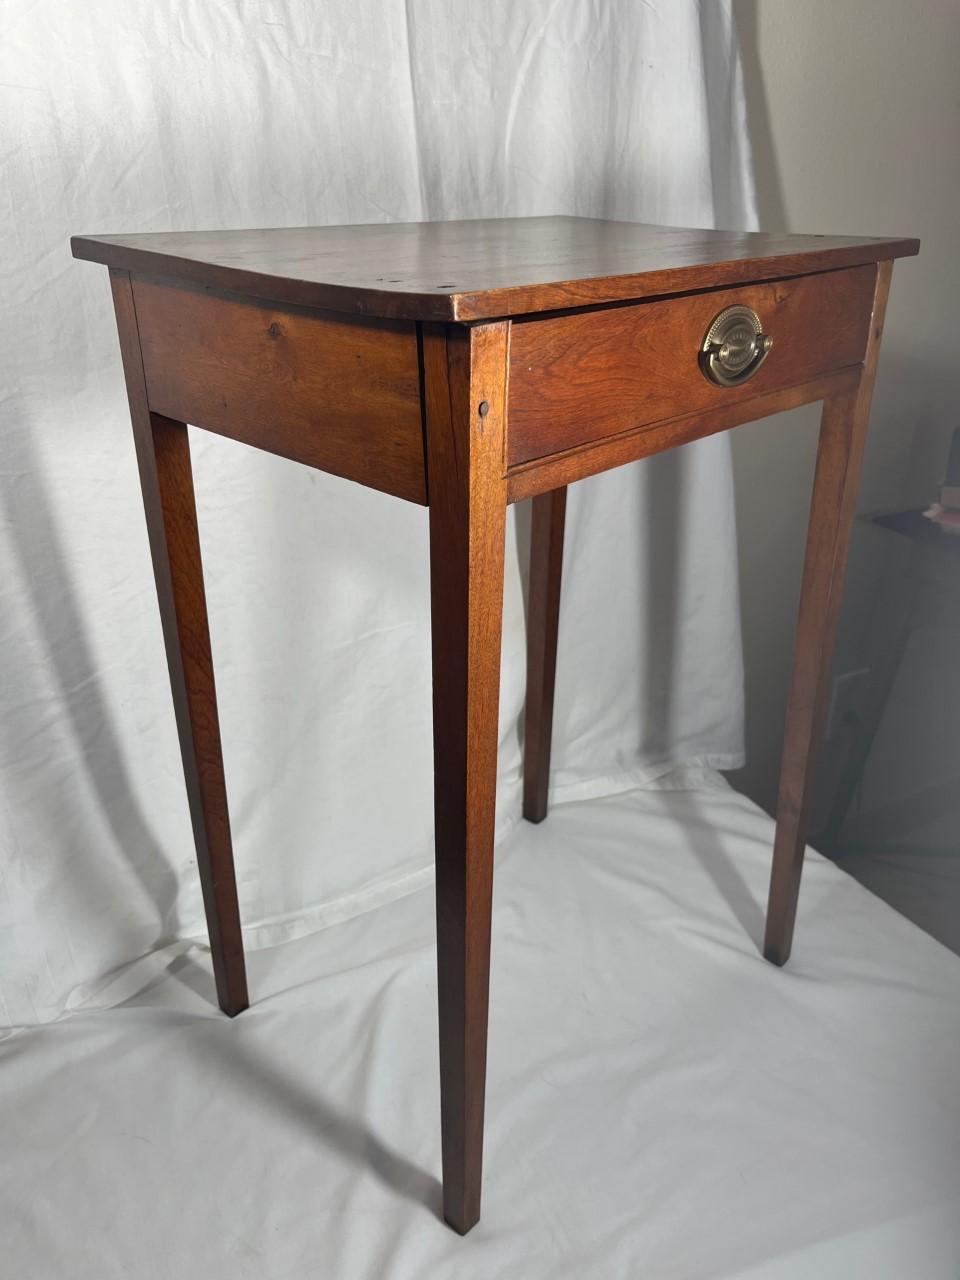 Hand-Carved 18th Century American Hepplewhite Federal Style Mahogany Side Table For Sale